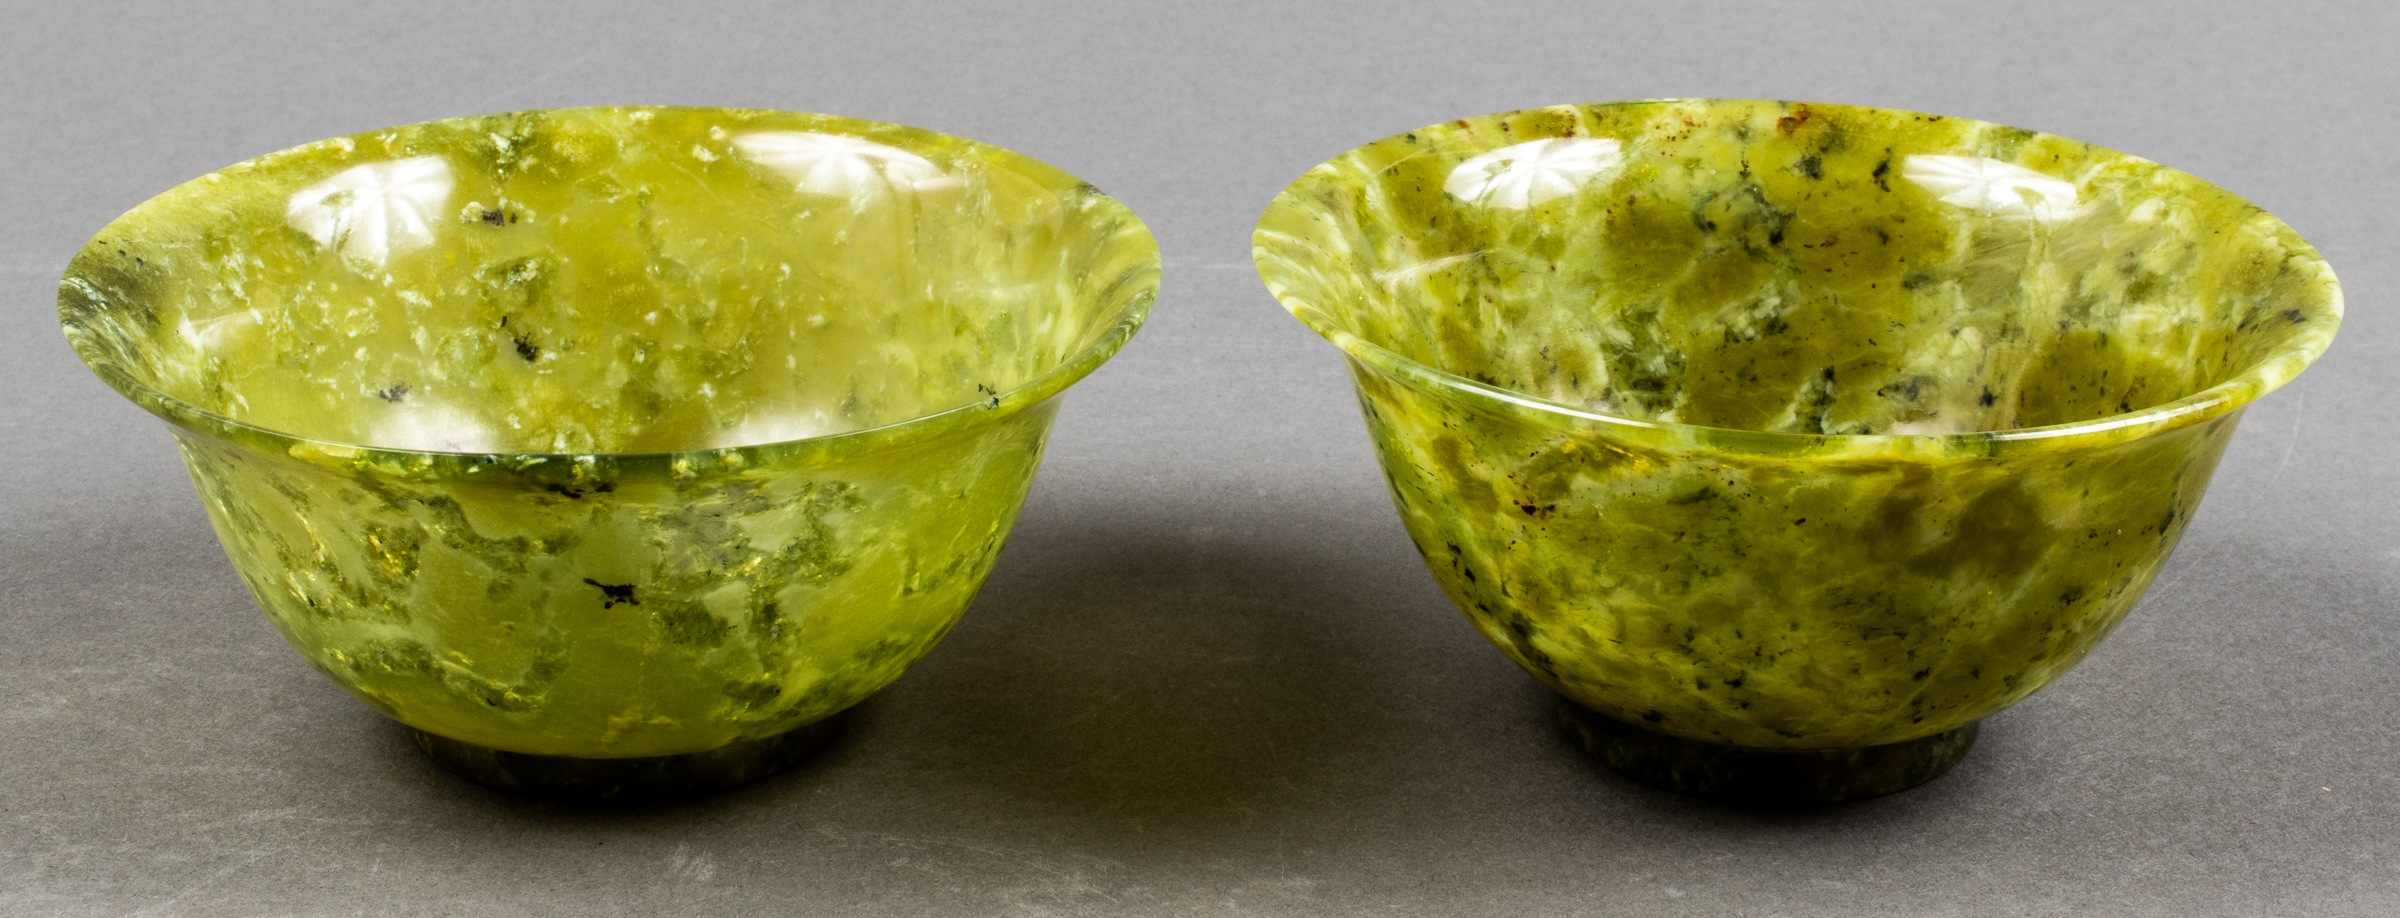 SPINACH JADE BOWLS FROM HETIAN 3c3eb4